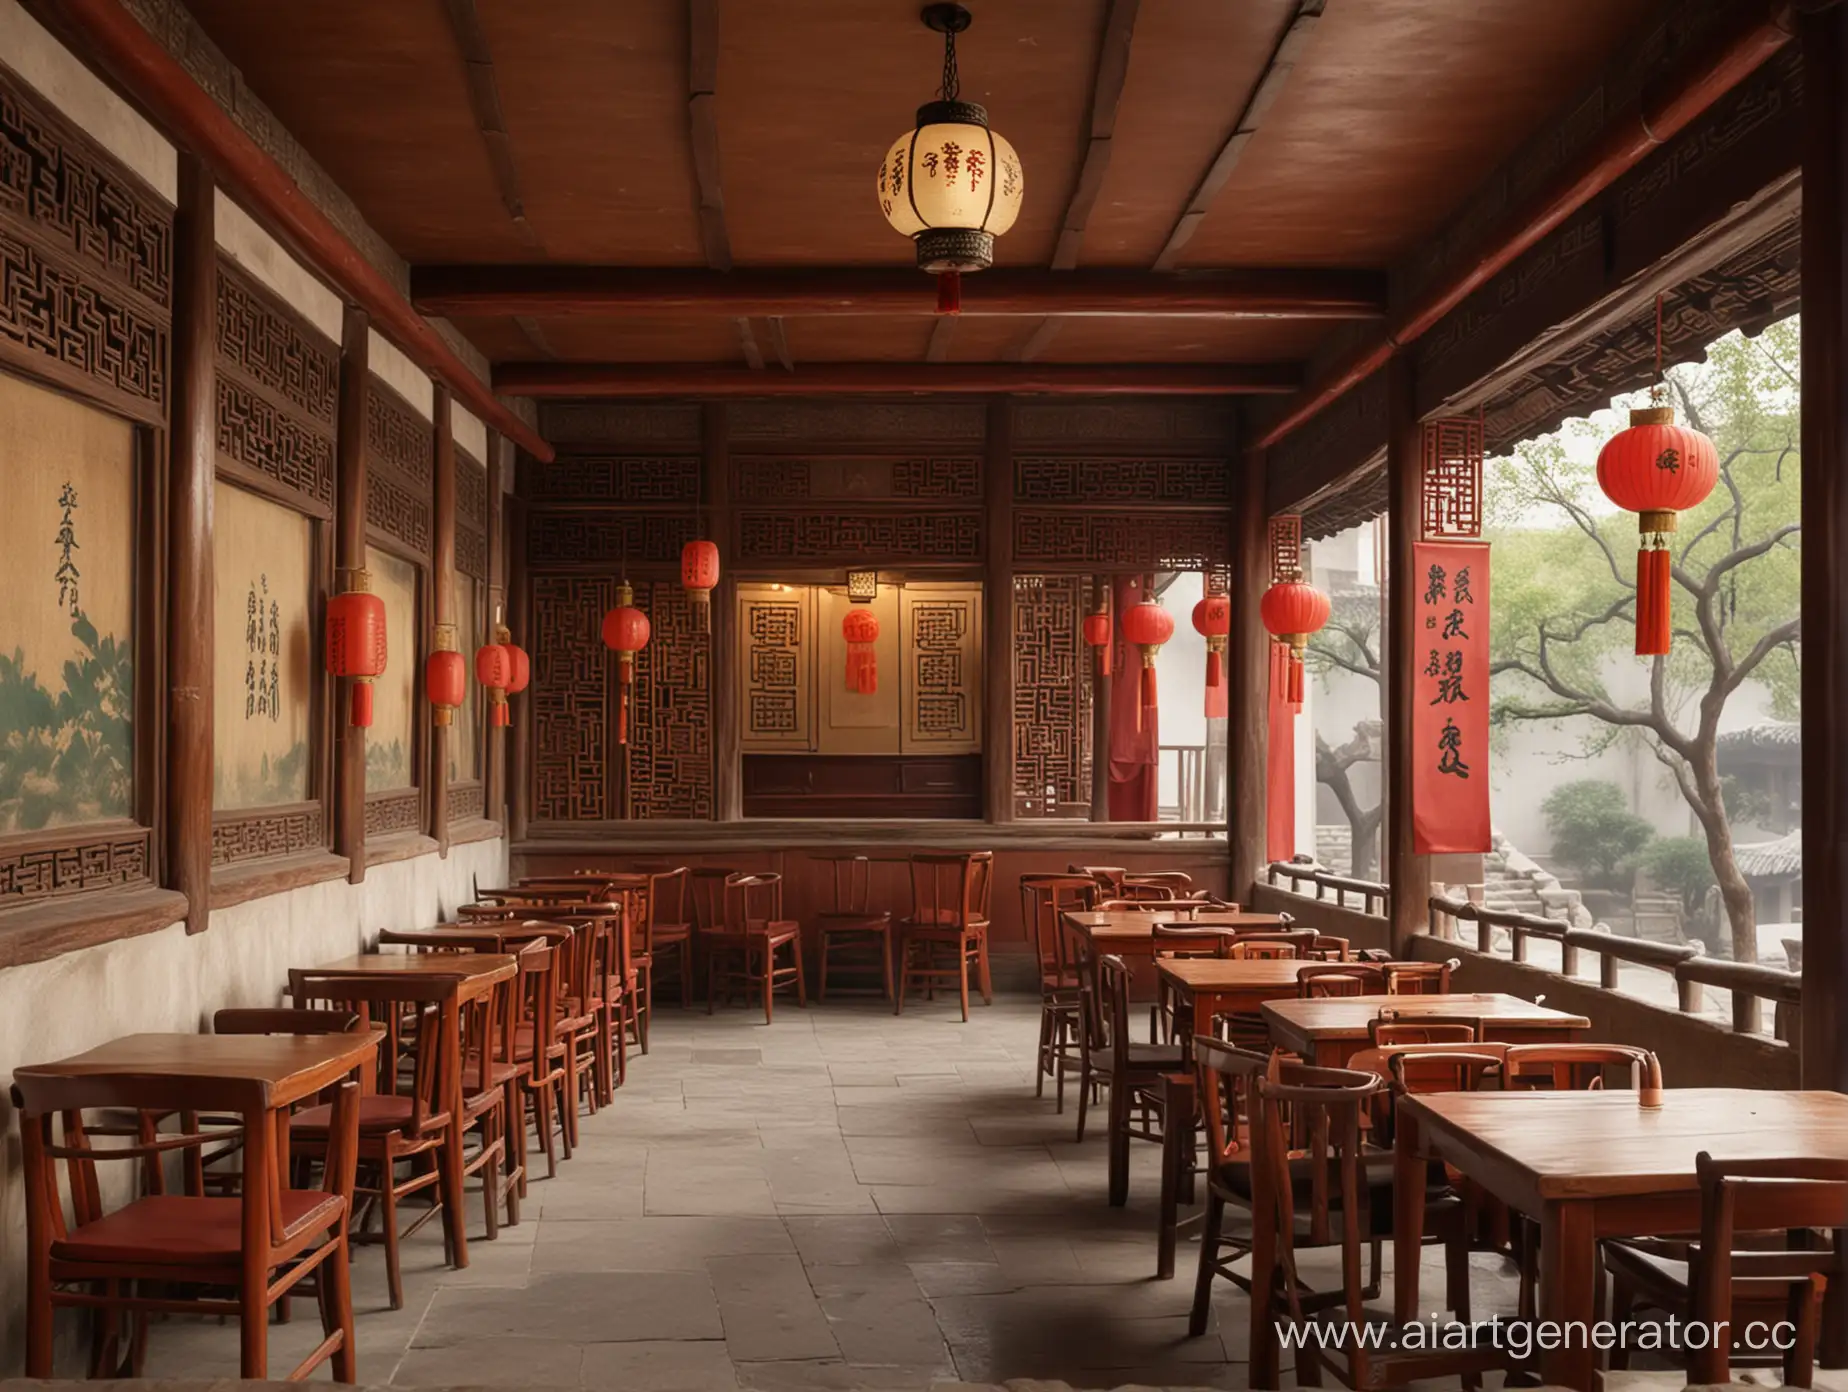 Ancient-Chinese-Cafe-Interior-with-Traditional-Decor